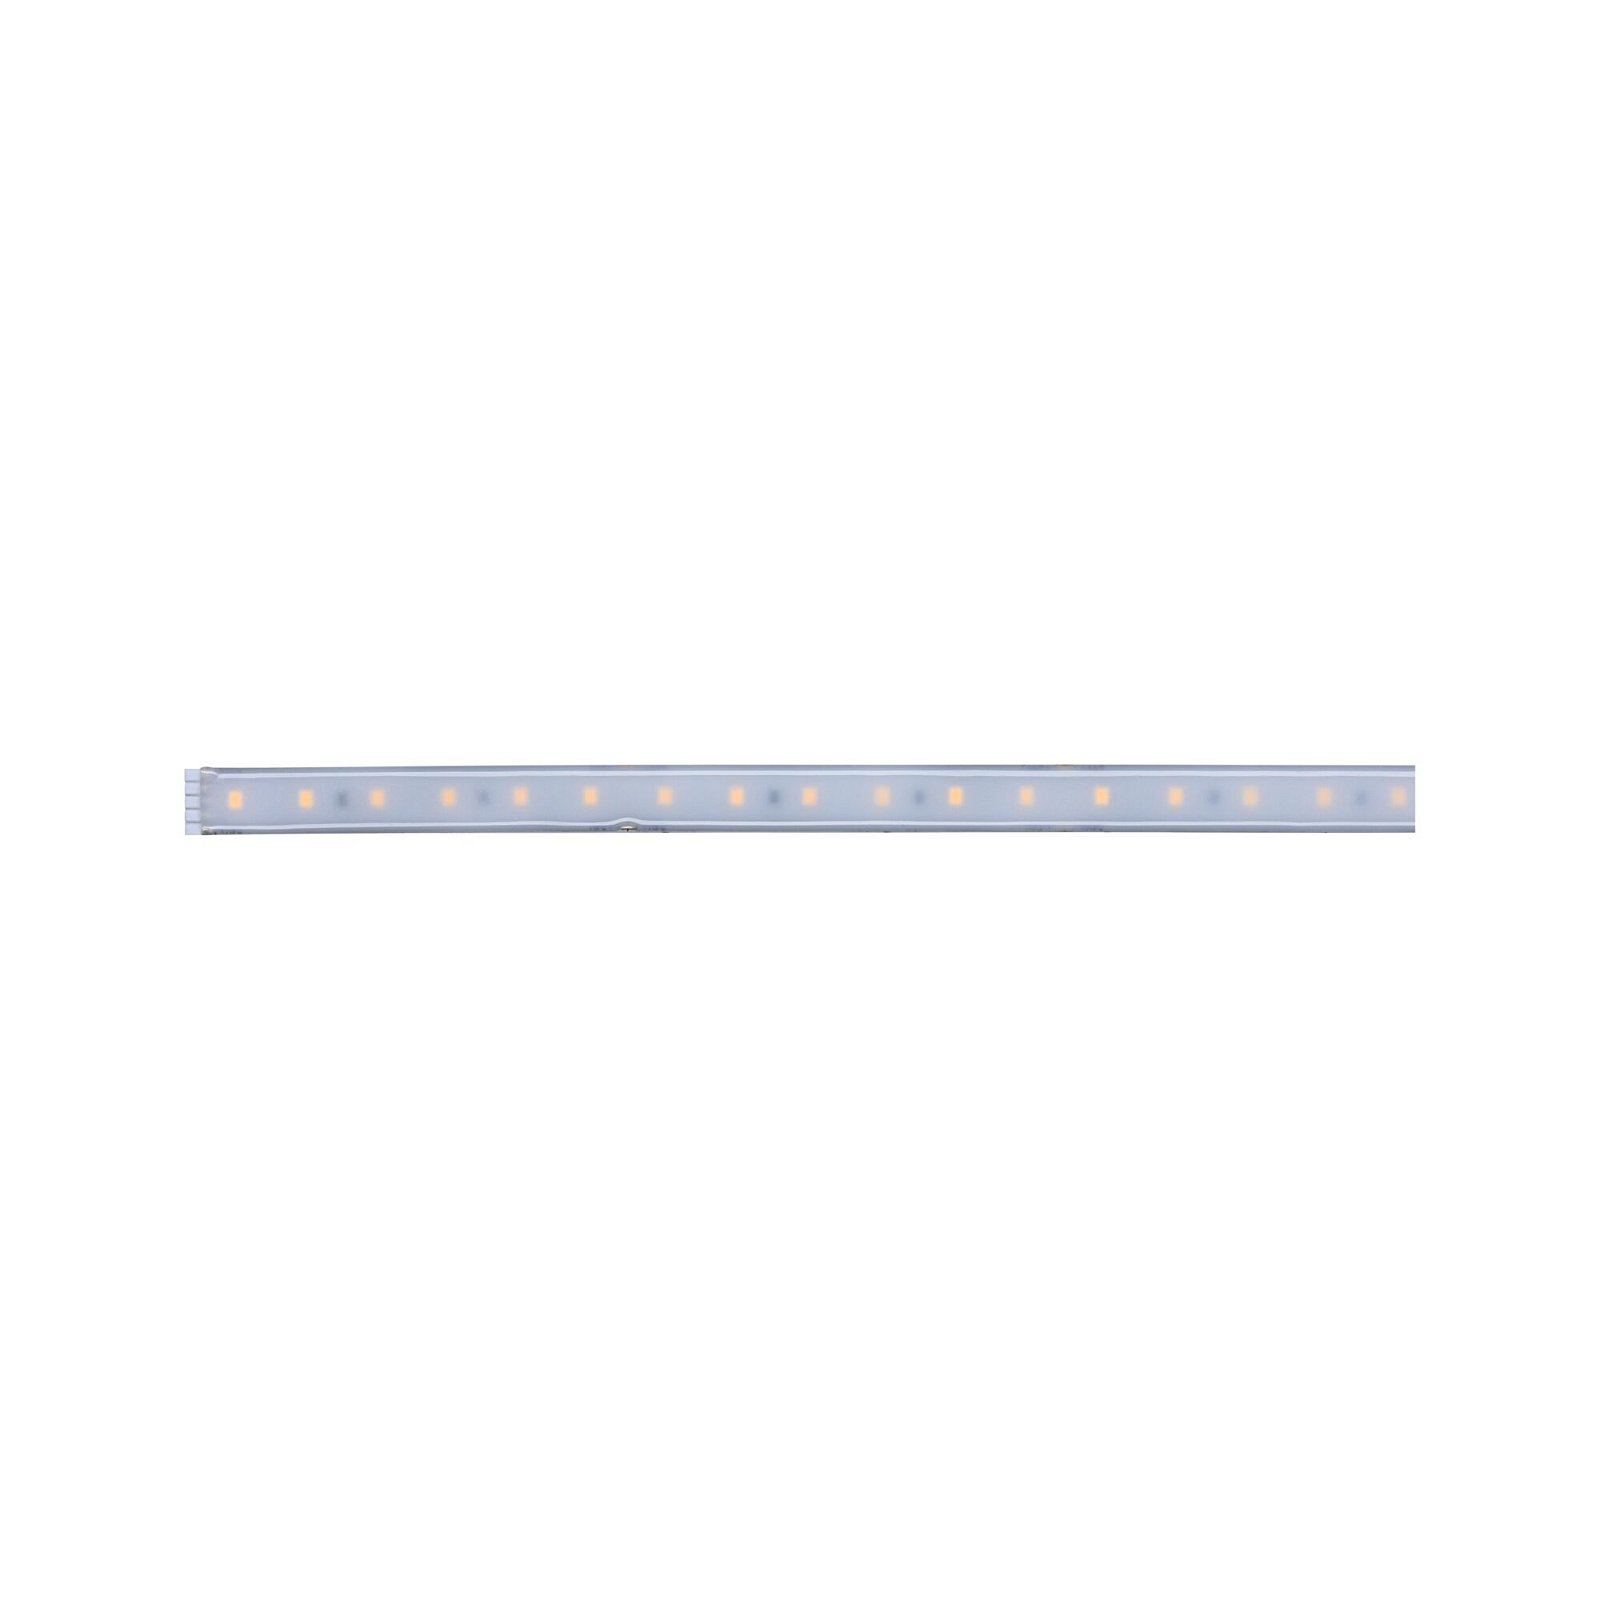 MaxLED 500 LED Strip Warm white 1m protect cover 6W 440lm/m 2700K